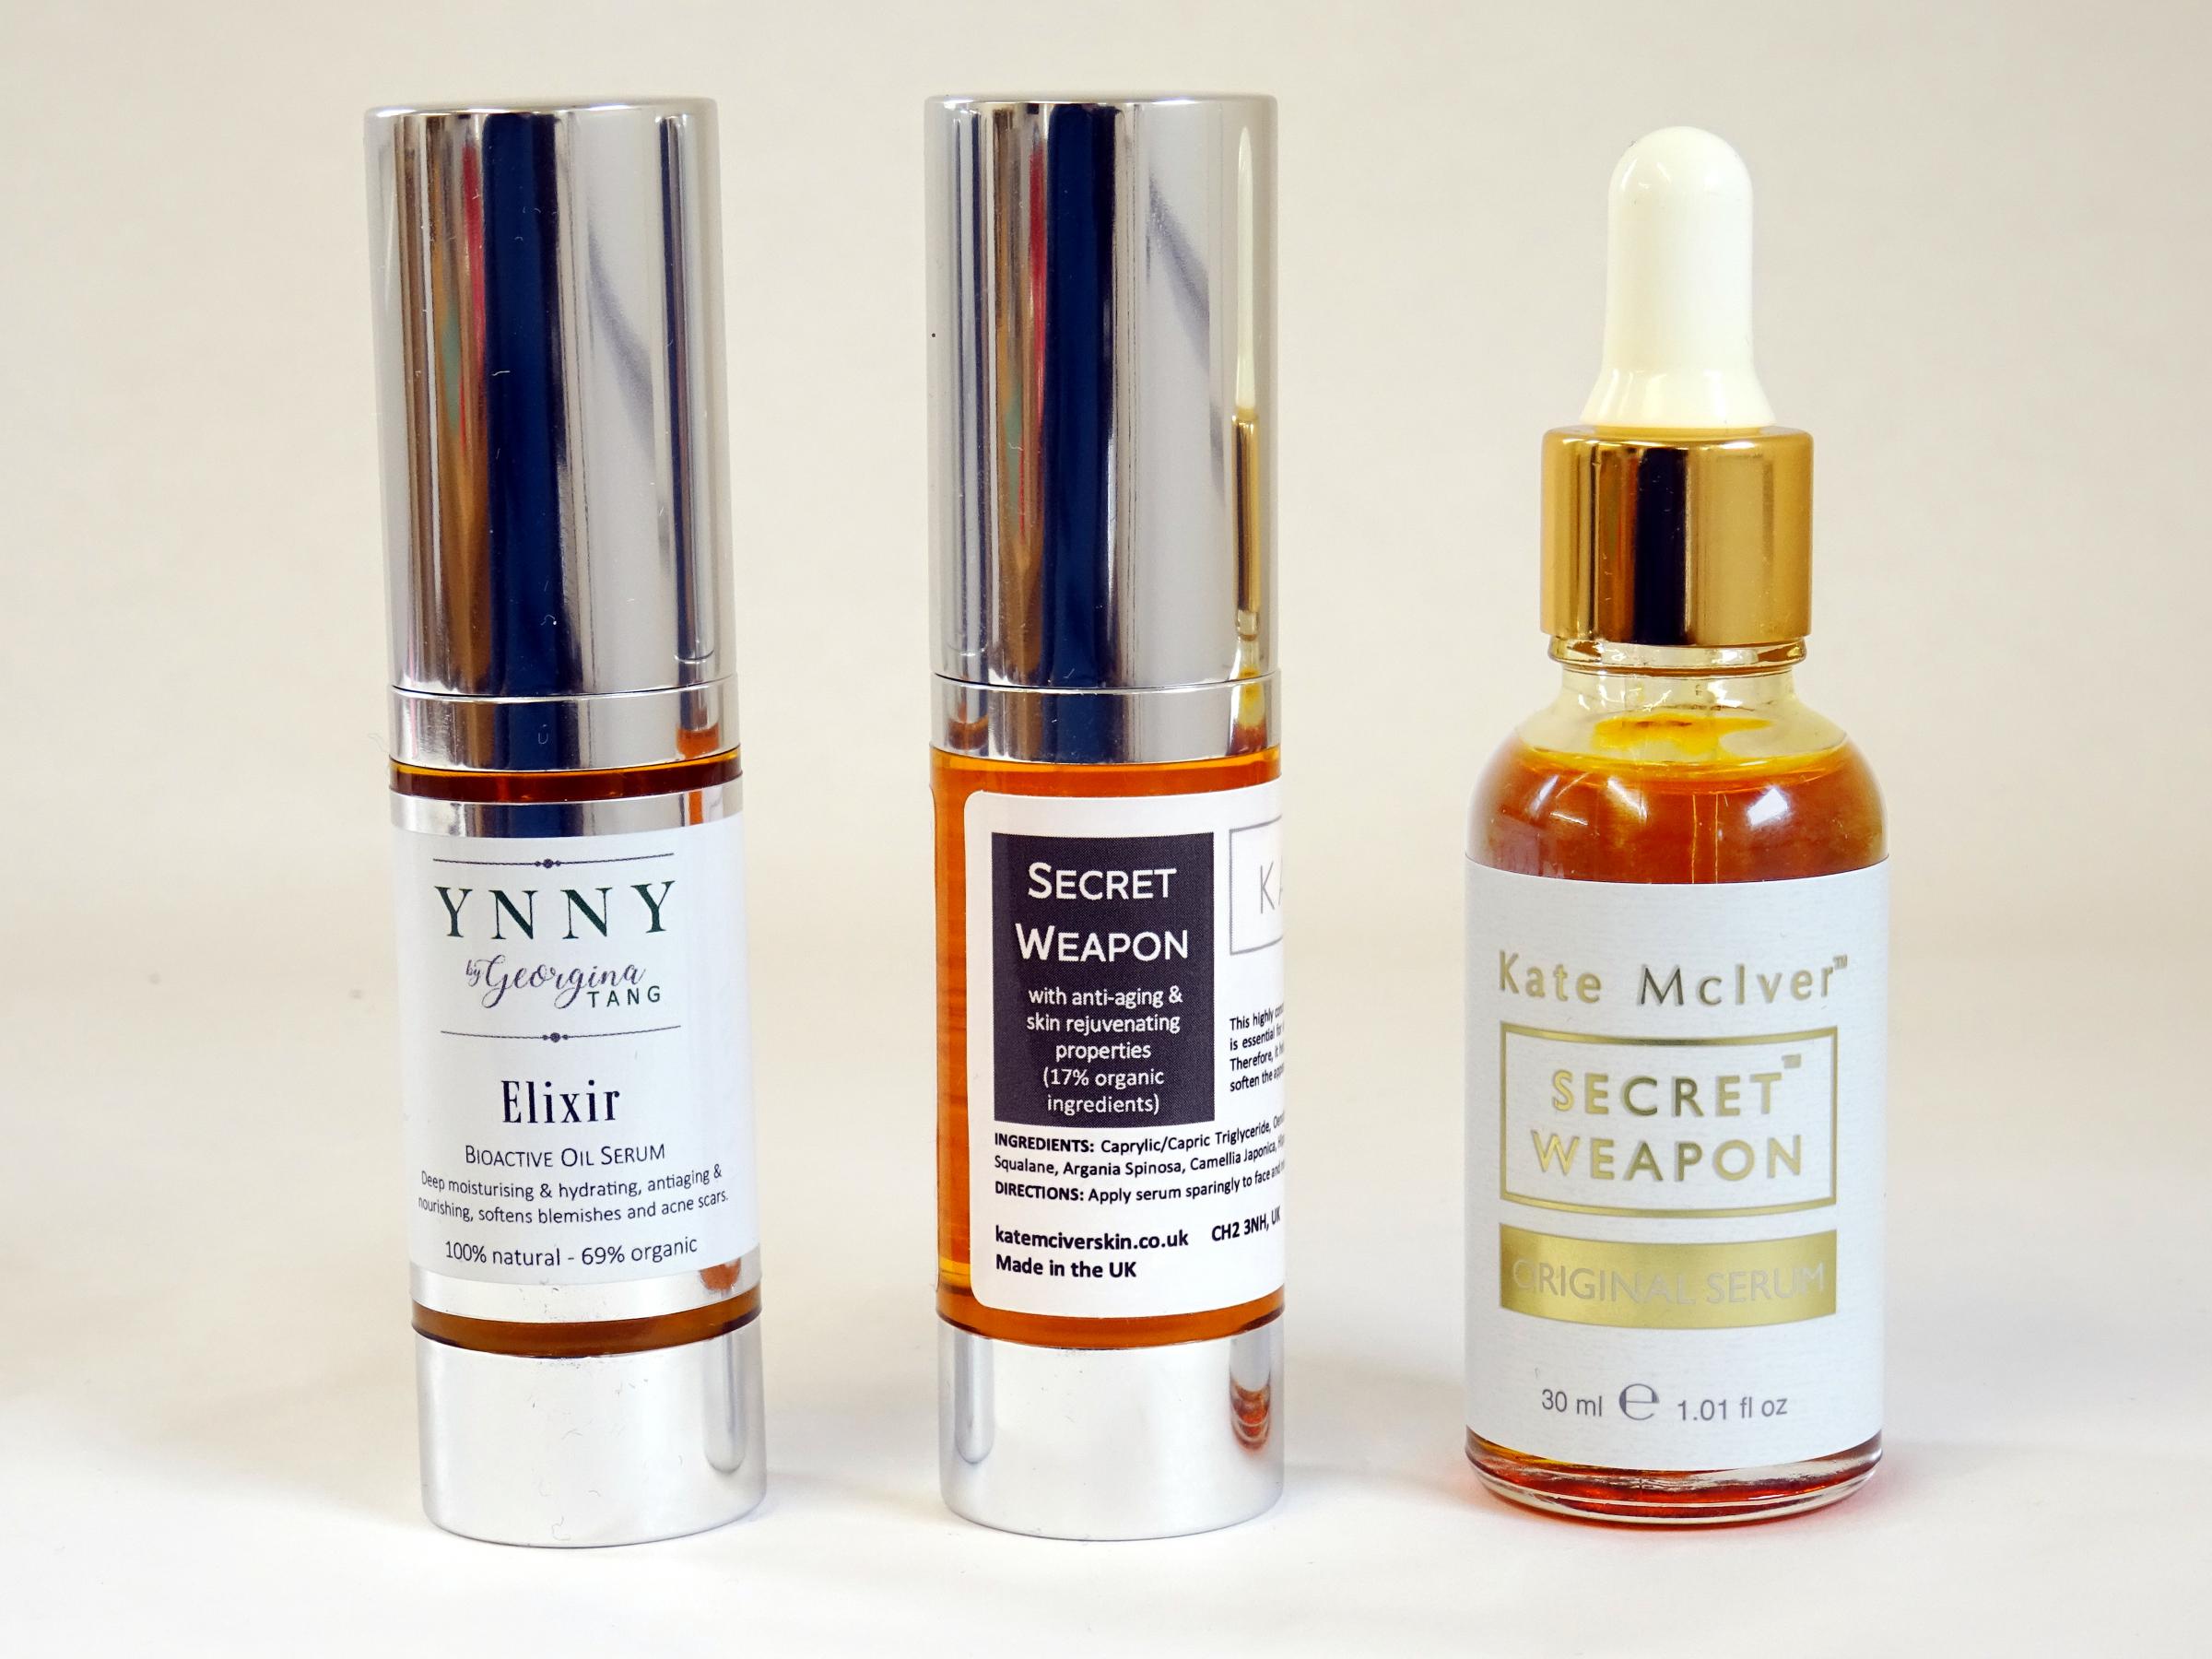 The YNNY by Georgina Tang serum and the Kate McIver Secret Weapon serum.